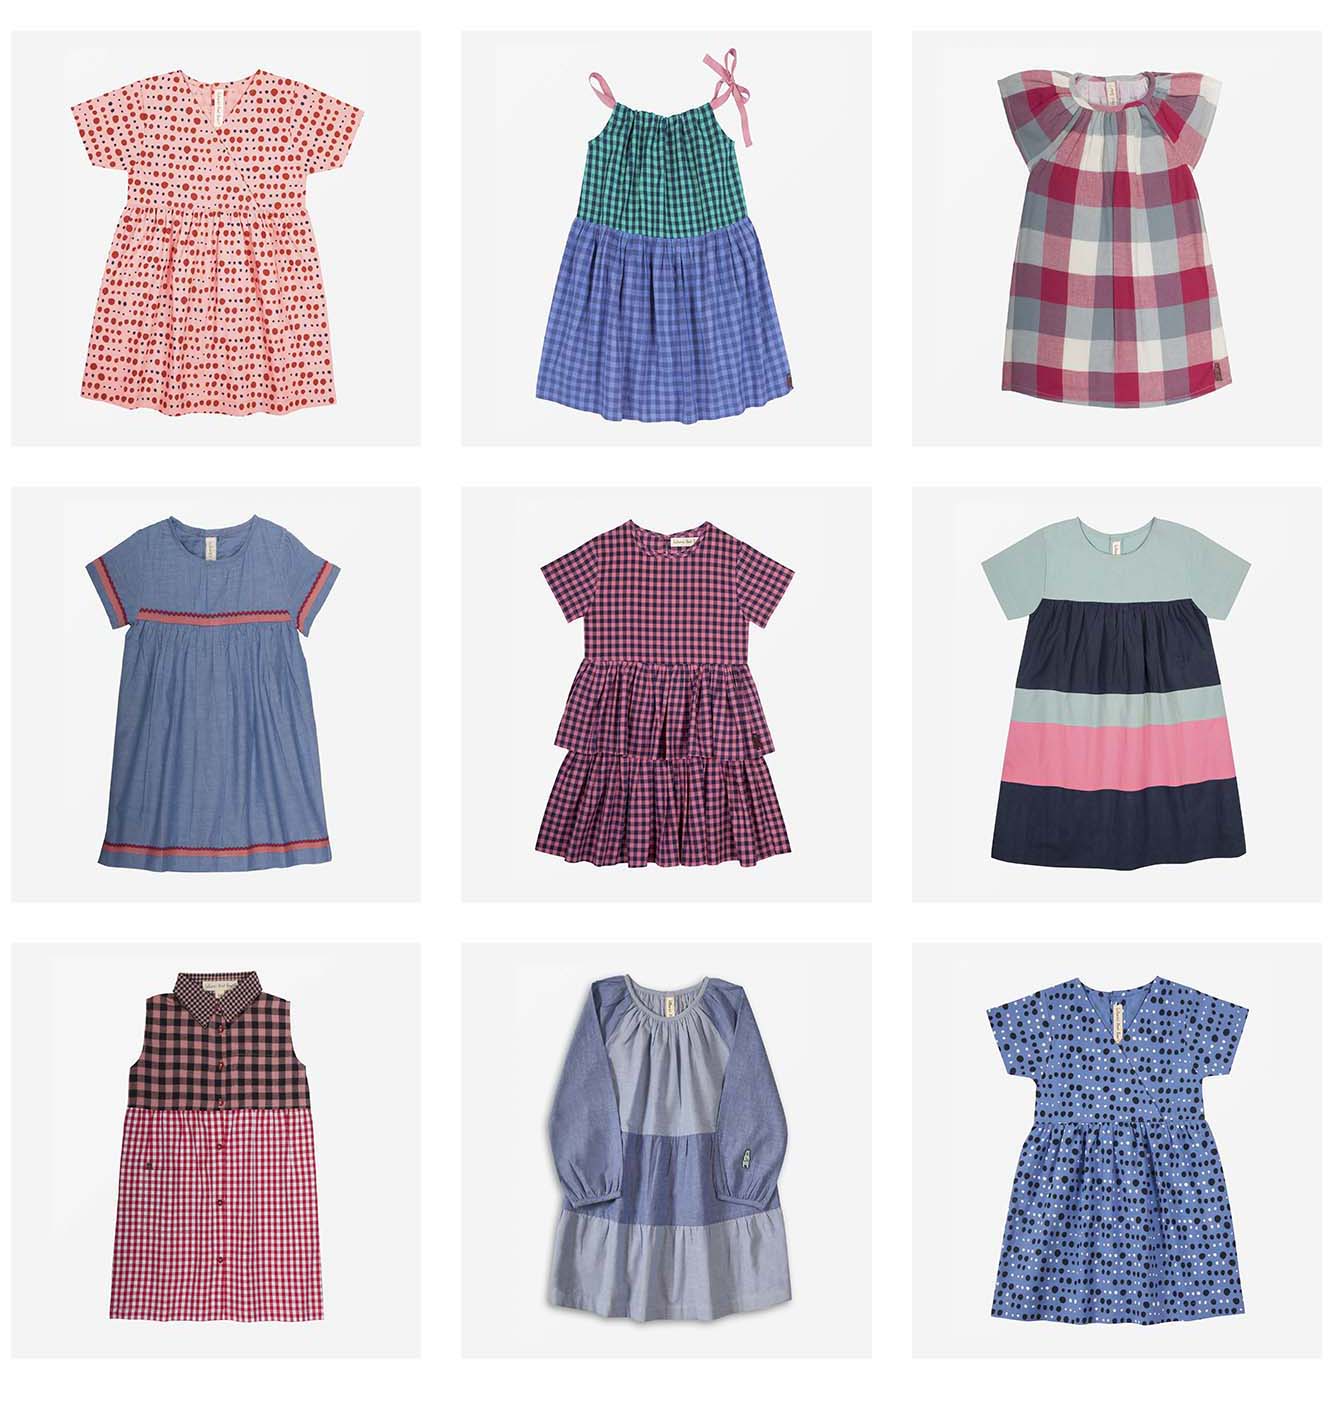 For effortless summer dressing, Bear's gathered together some of his favourite dresses. We're talking clashing colours and prints, all guaranteed to add fun to any wardrobe.